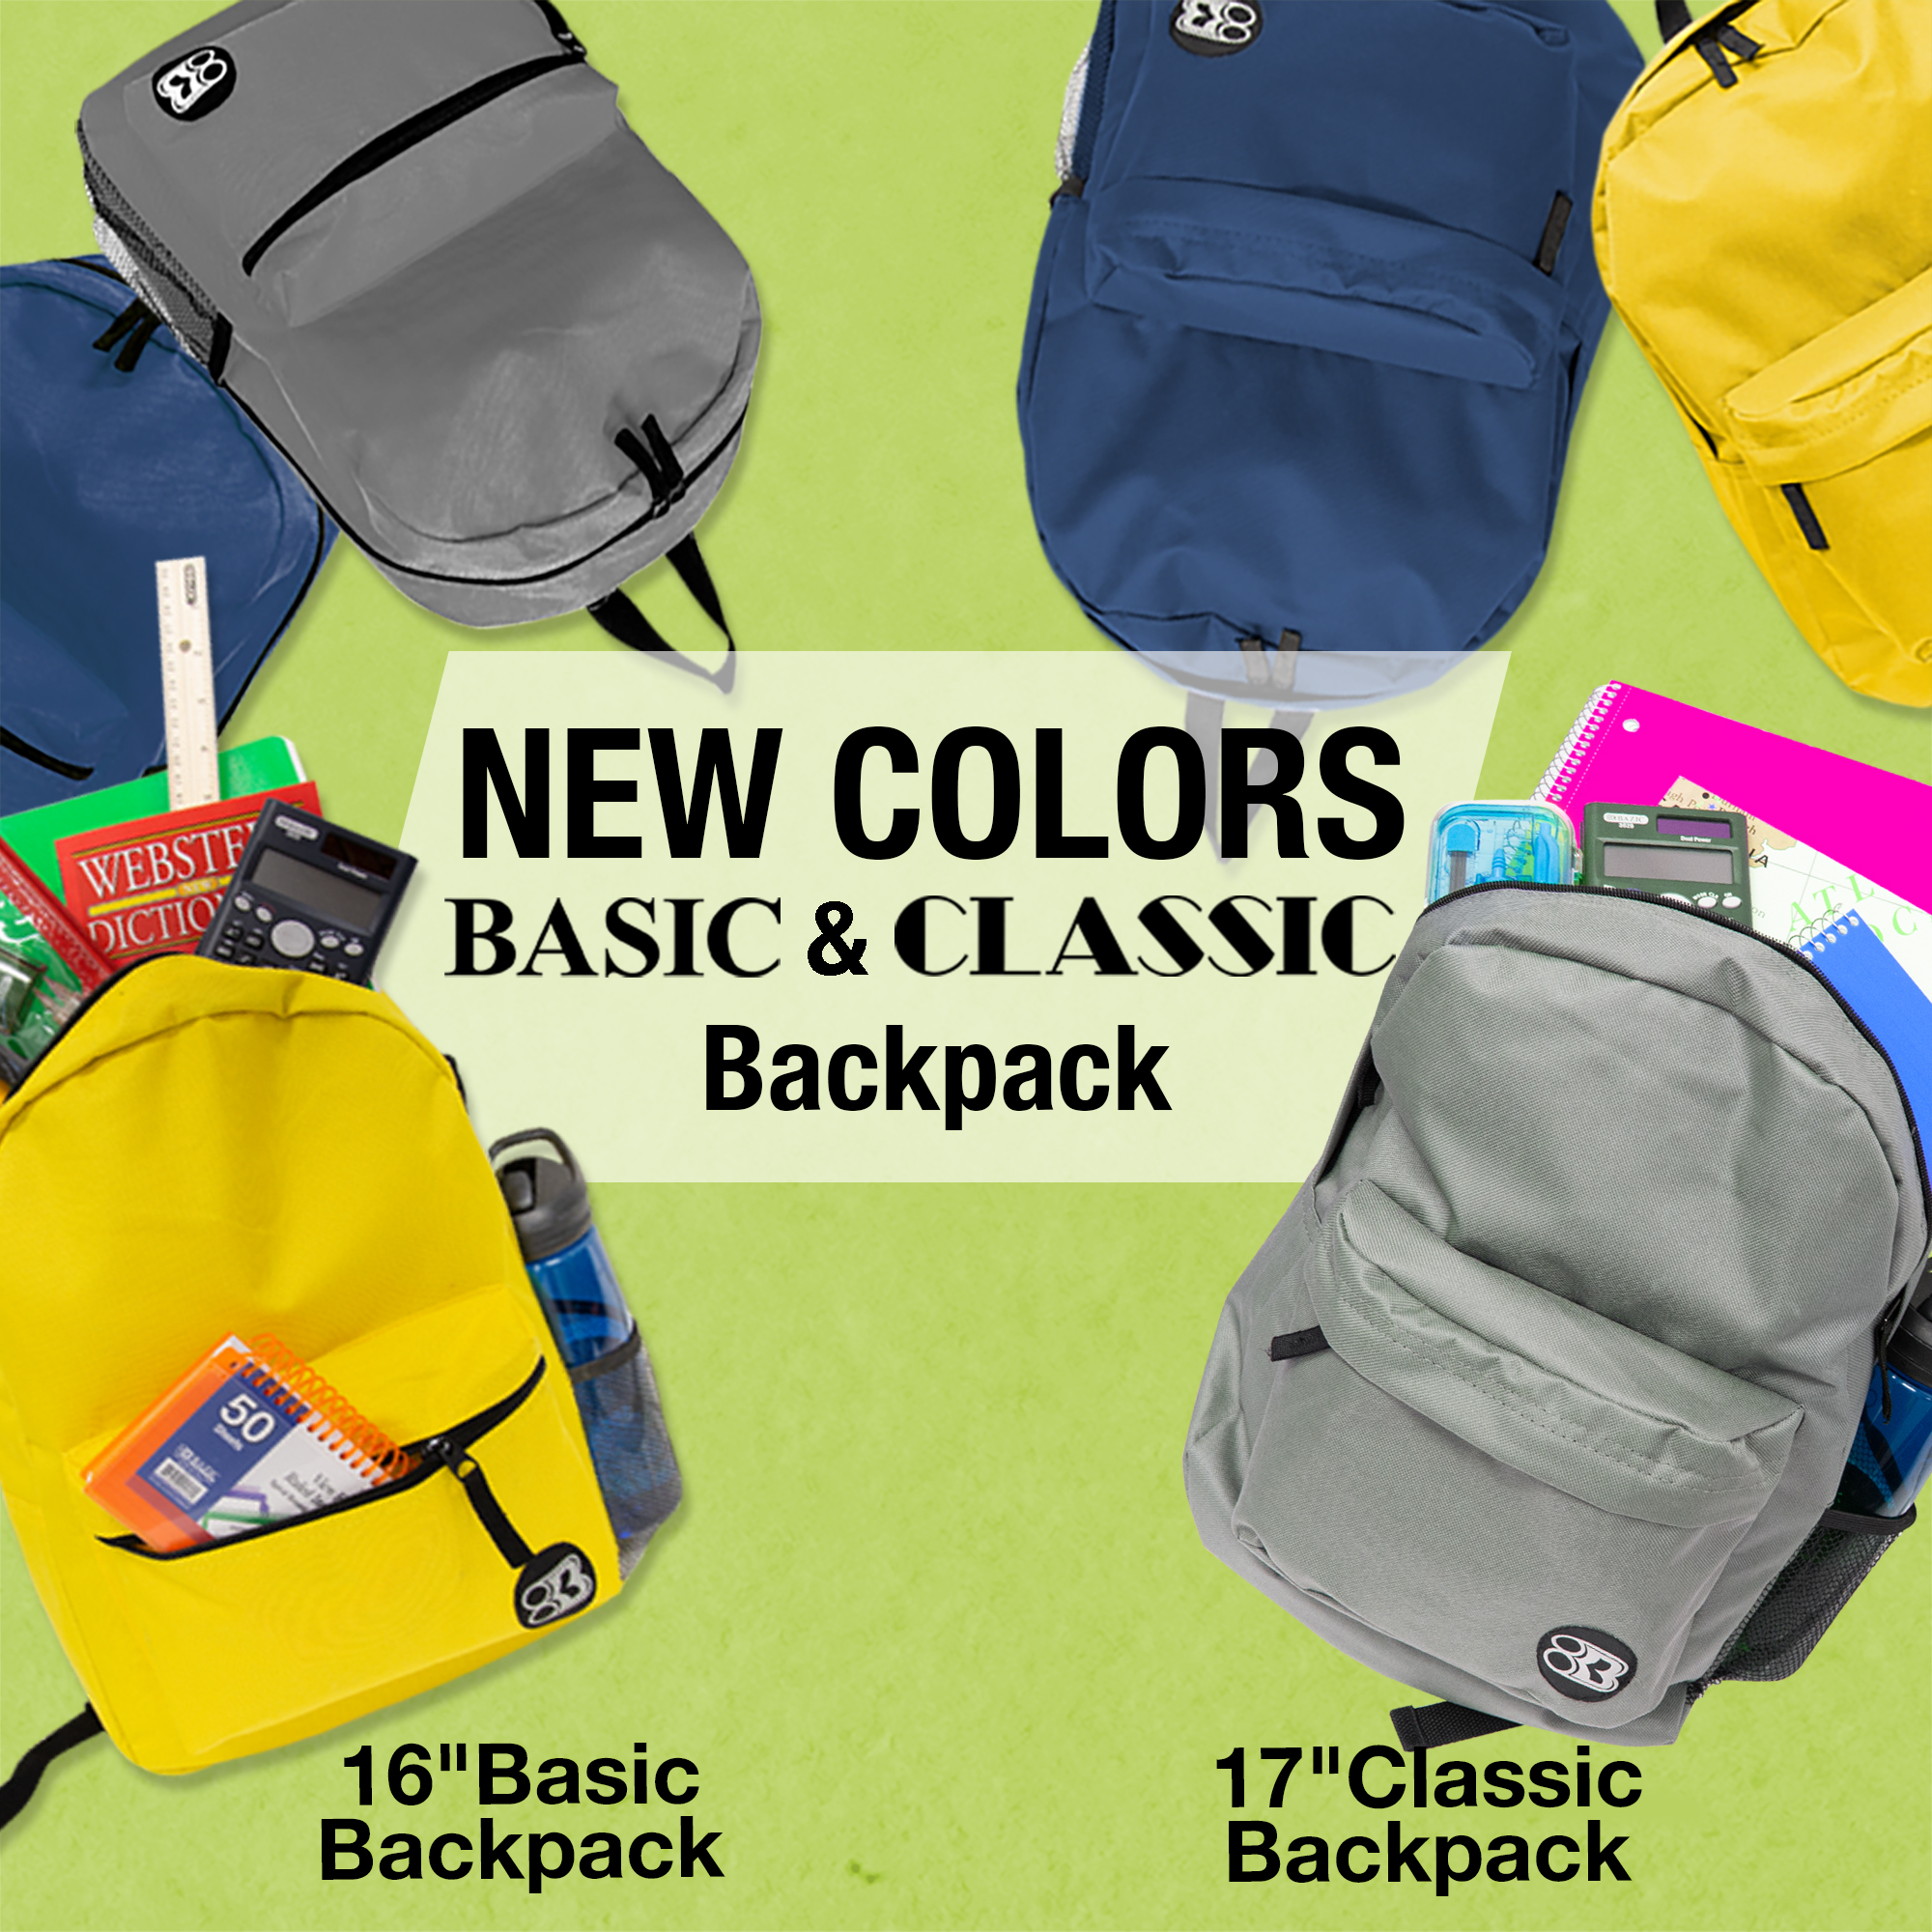 BAZIC School Backpack Basic 16" Mustard, School Bag for Students, 1-Pack - image 3 of 7